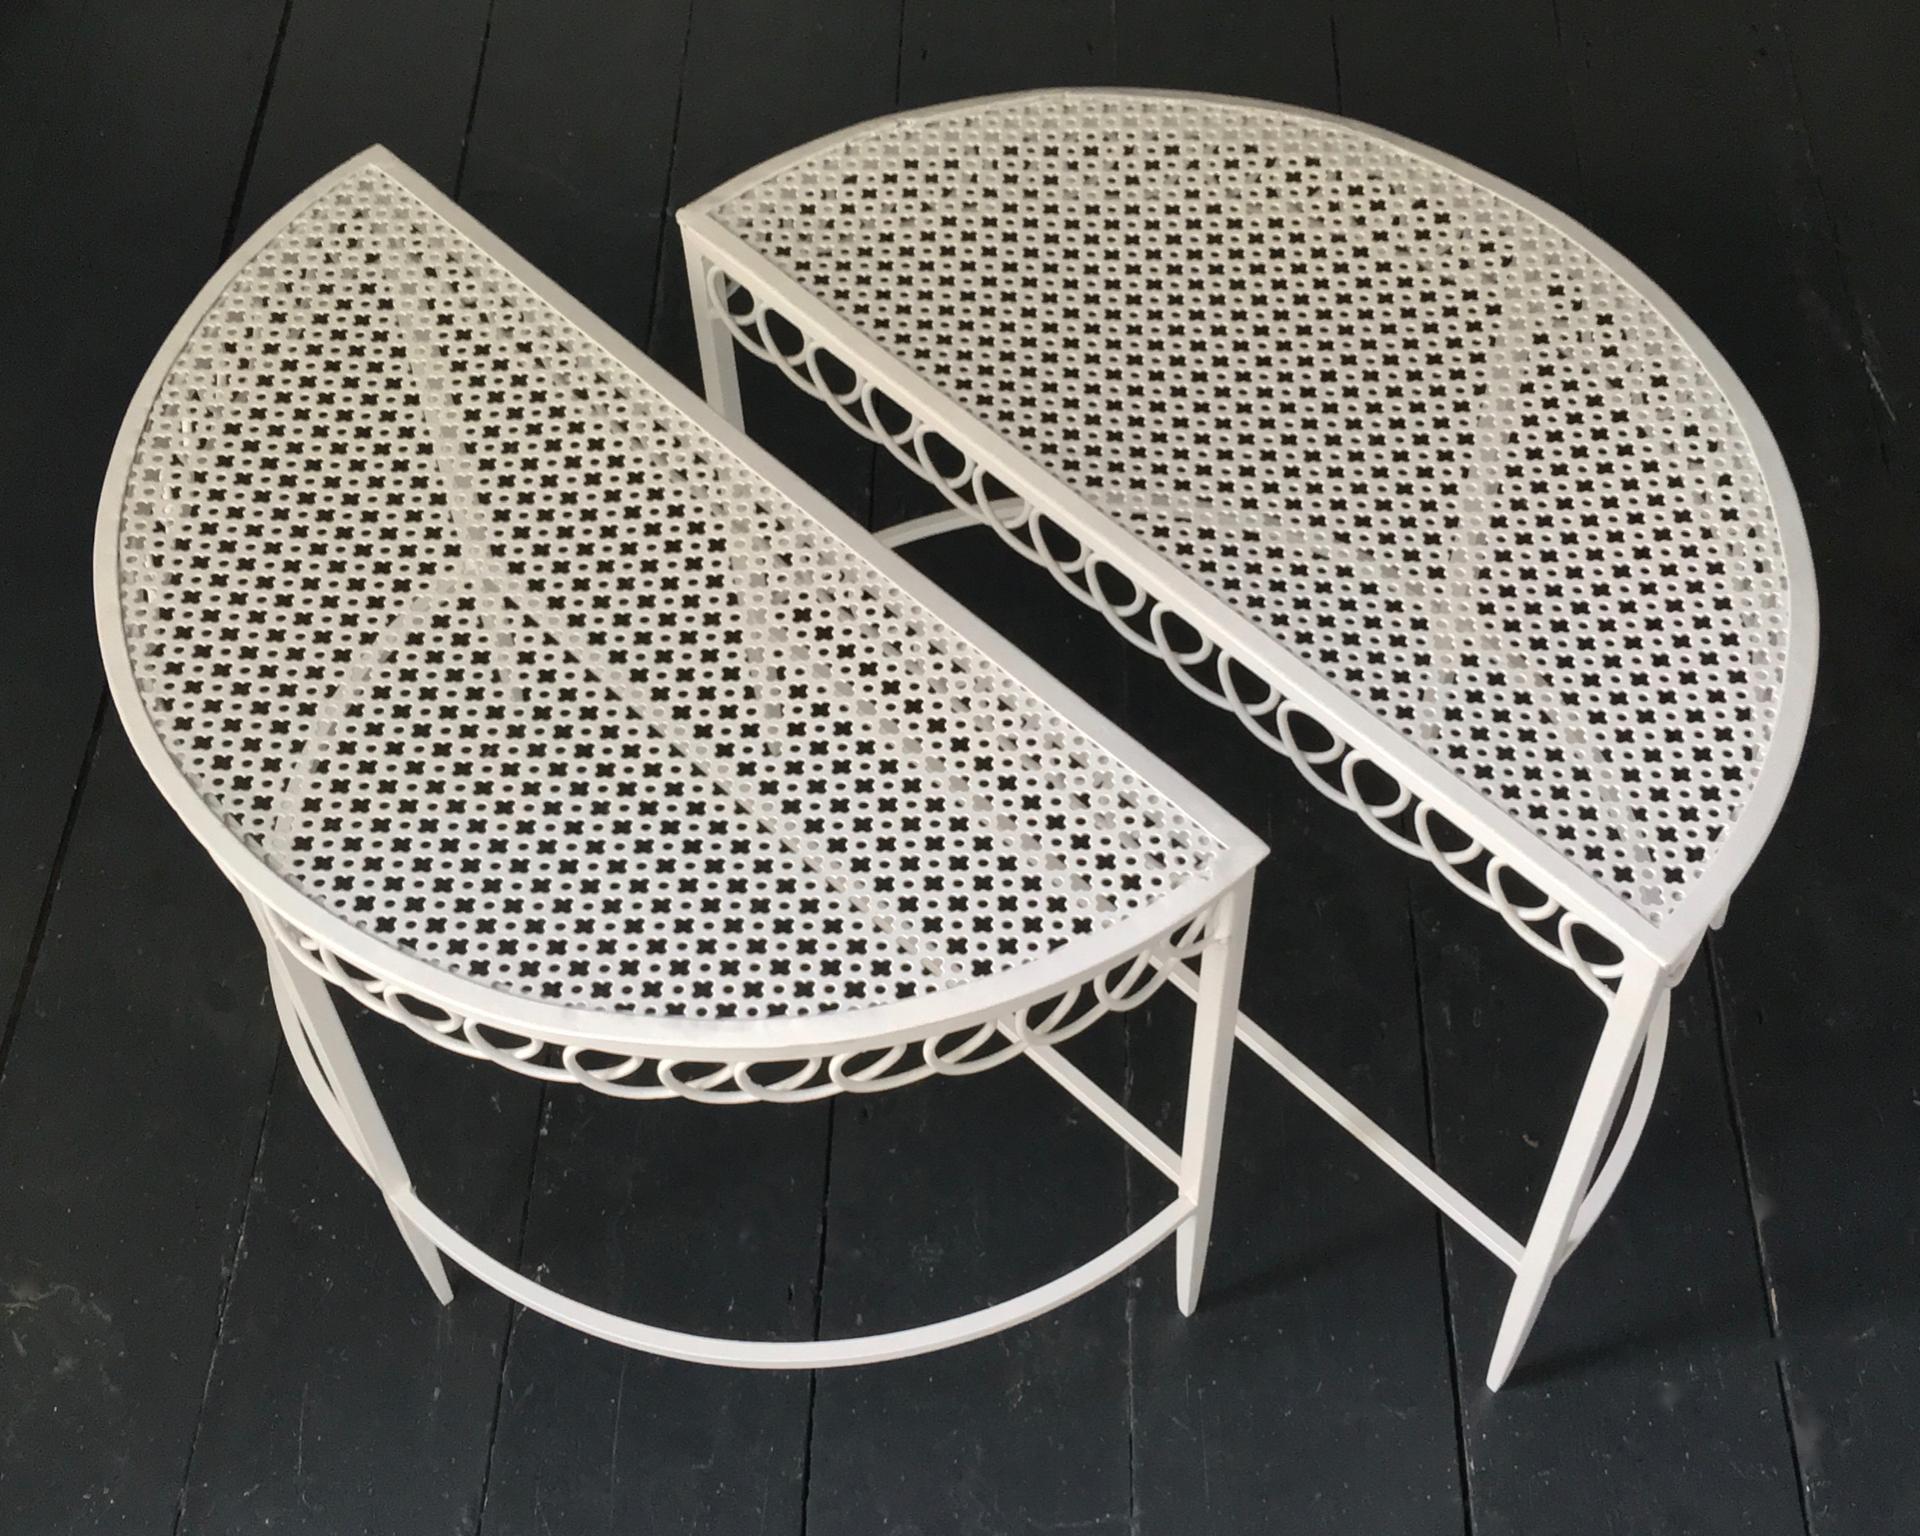 Painted Pair of Demilune Metal Tables in White by Matégot, Mid-20th Century France